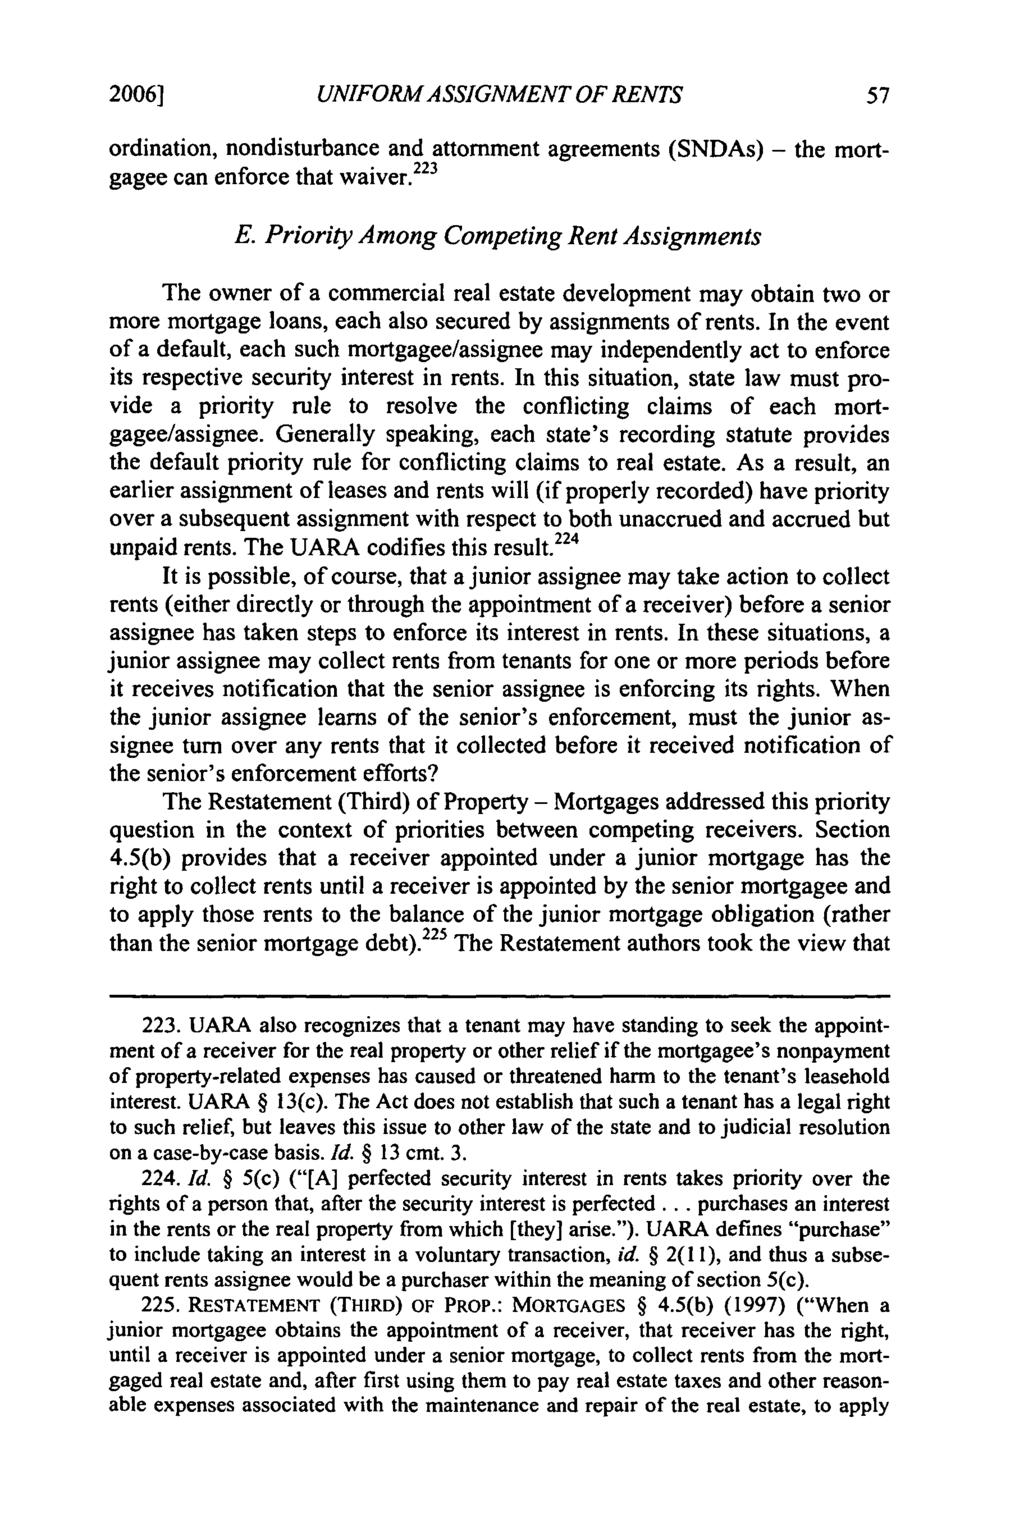 2006] Freyermuth: Freyermuth: Modernizing Security in Rents UNIFORM ASSIGNMENT OF RENTS ordination, nondisturbance and attomment agreements (SNDAs) - the mortgagee can enforce that waiver. 223 E.